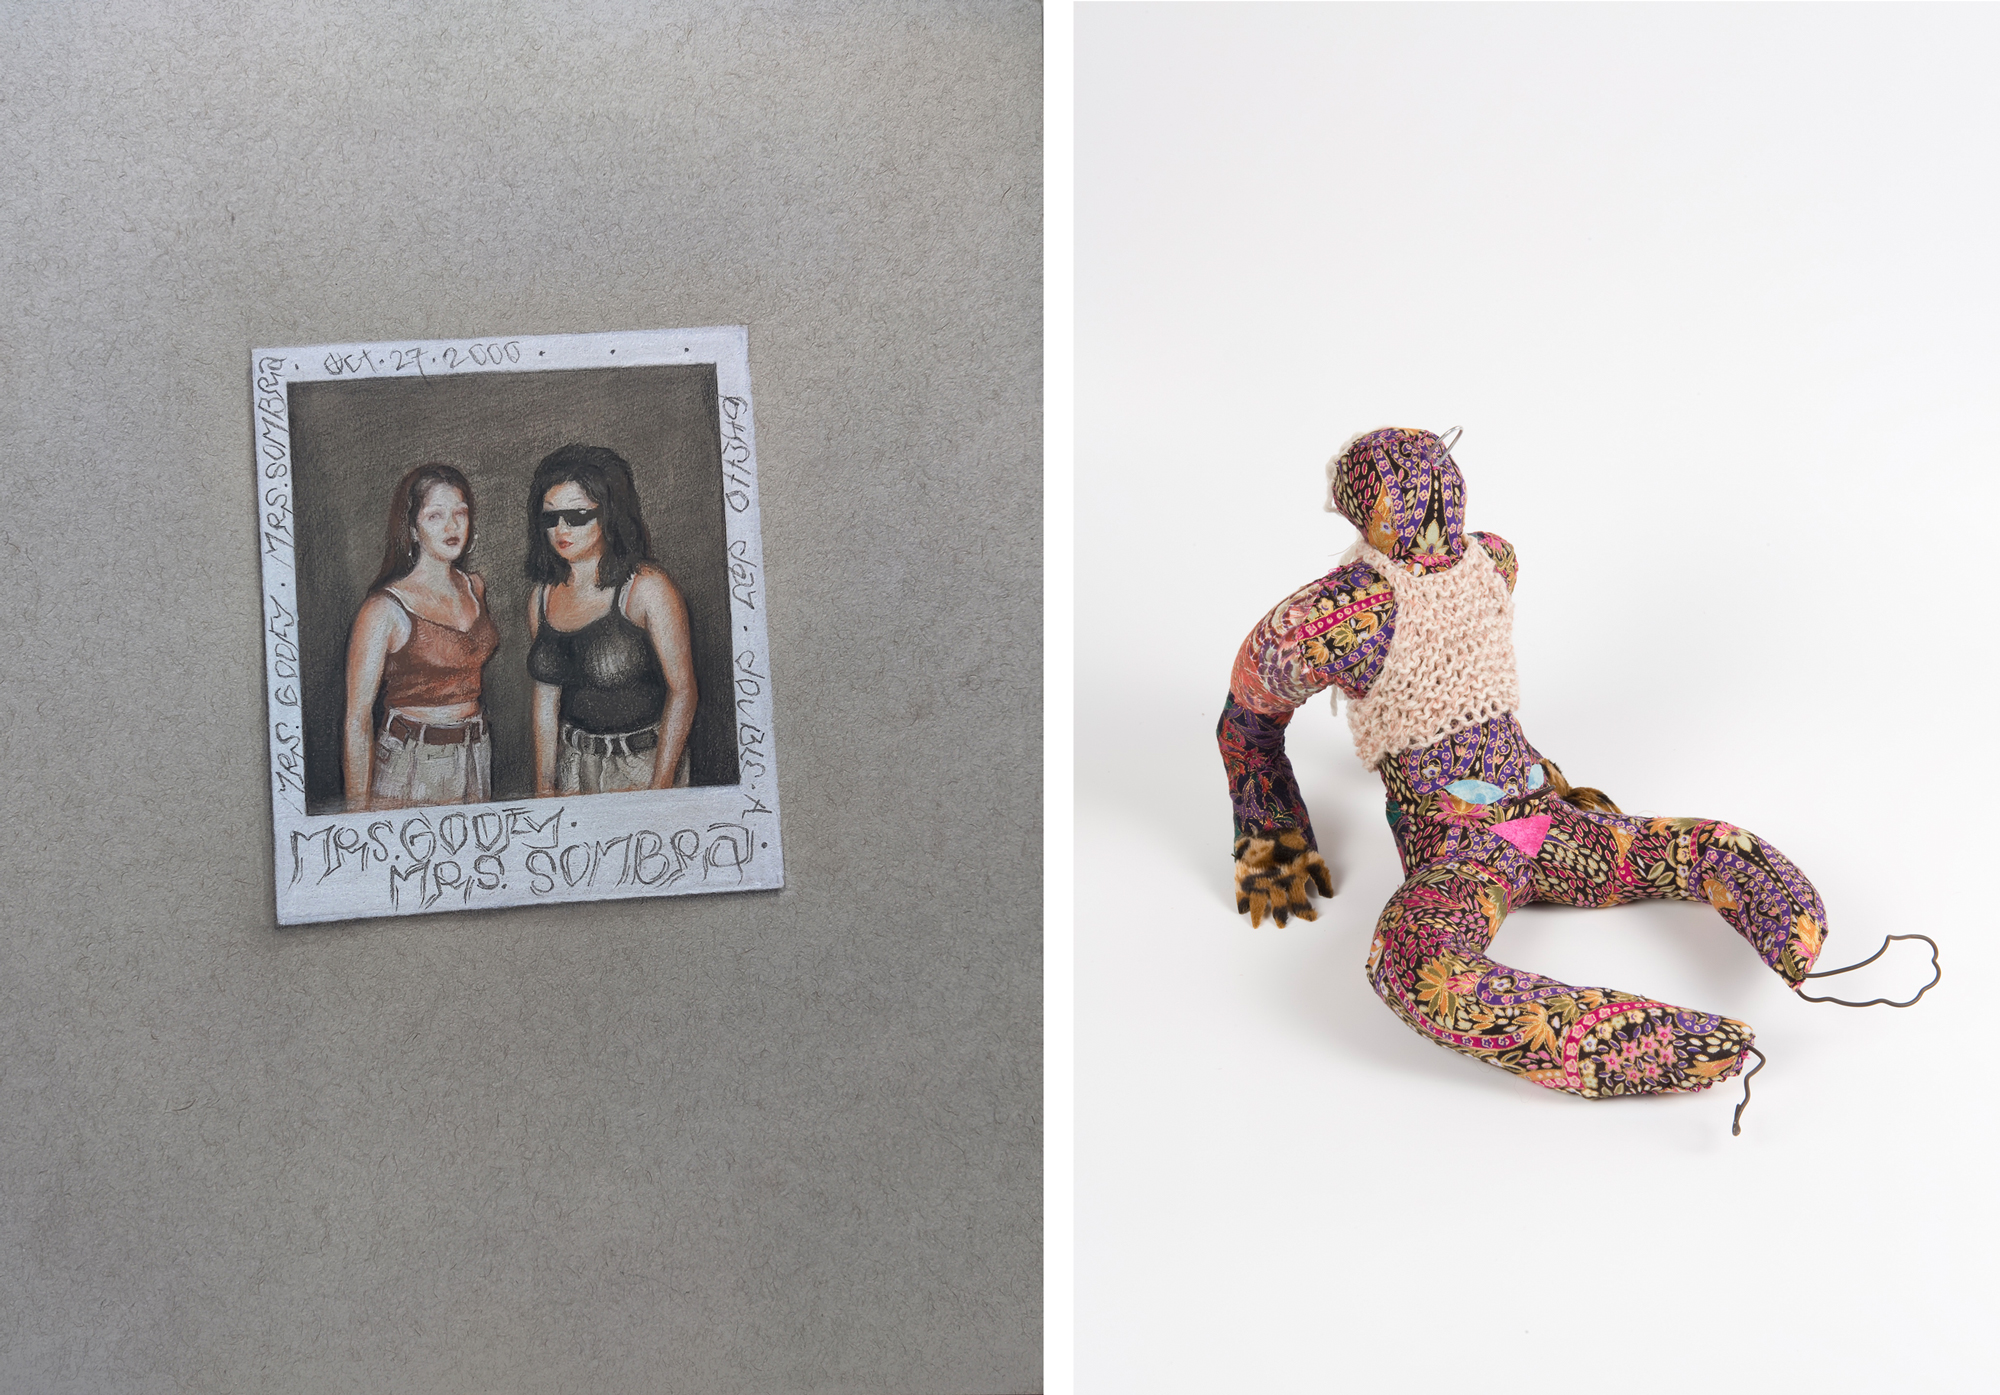 At left, a drawing of a polaroid of two women in tank tops with writing around the border against gray background, at right, a sewn sculpture of a figure reclining